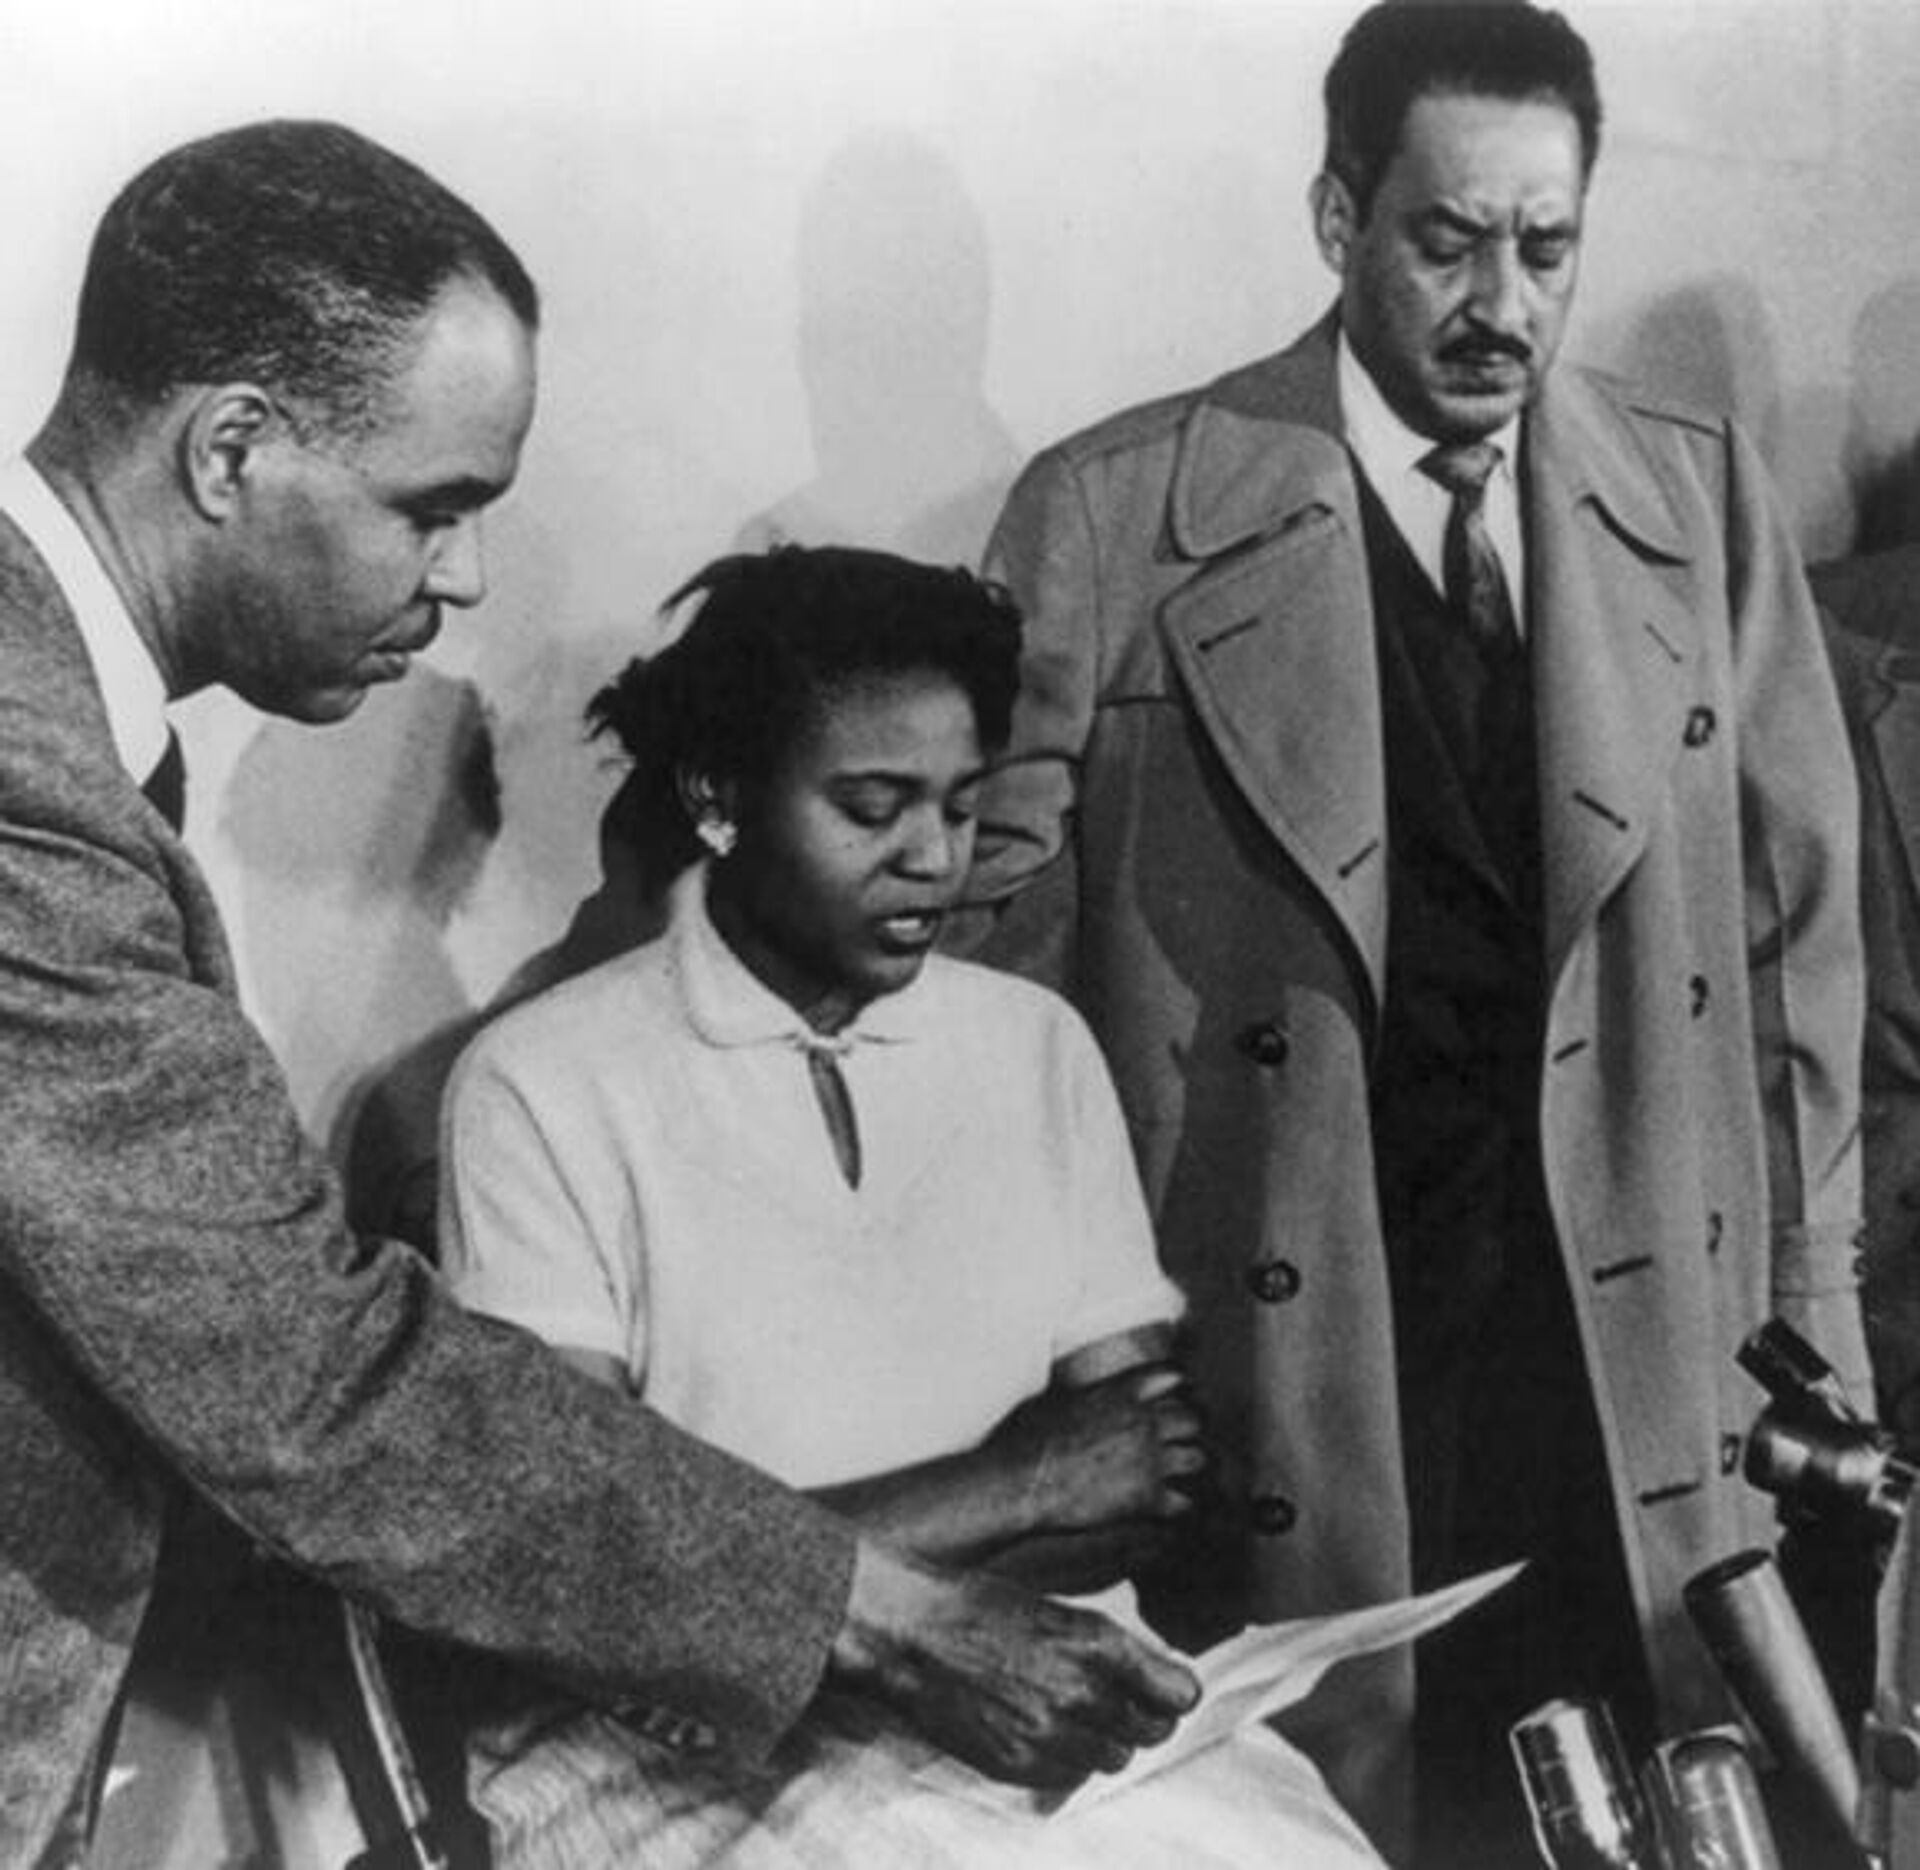 [Civil Rights activist] Roy Wilkins in press conference with Autherine Lucy and Thurgood Marshall, director and special counsel for NAACP Legal Defense and Education Fund. [1956] - Sputnik International, 1920, 13.02.2022